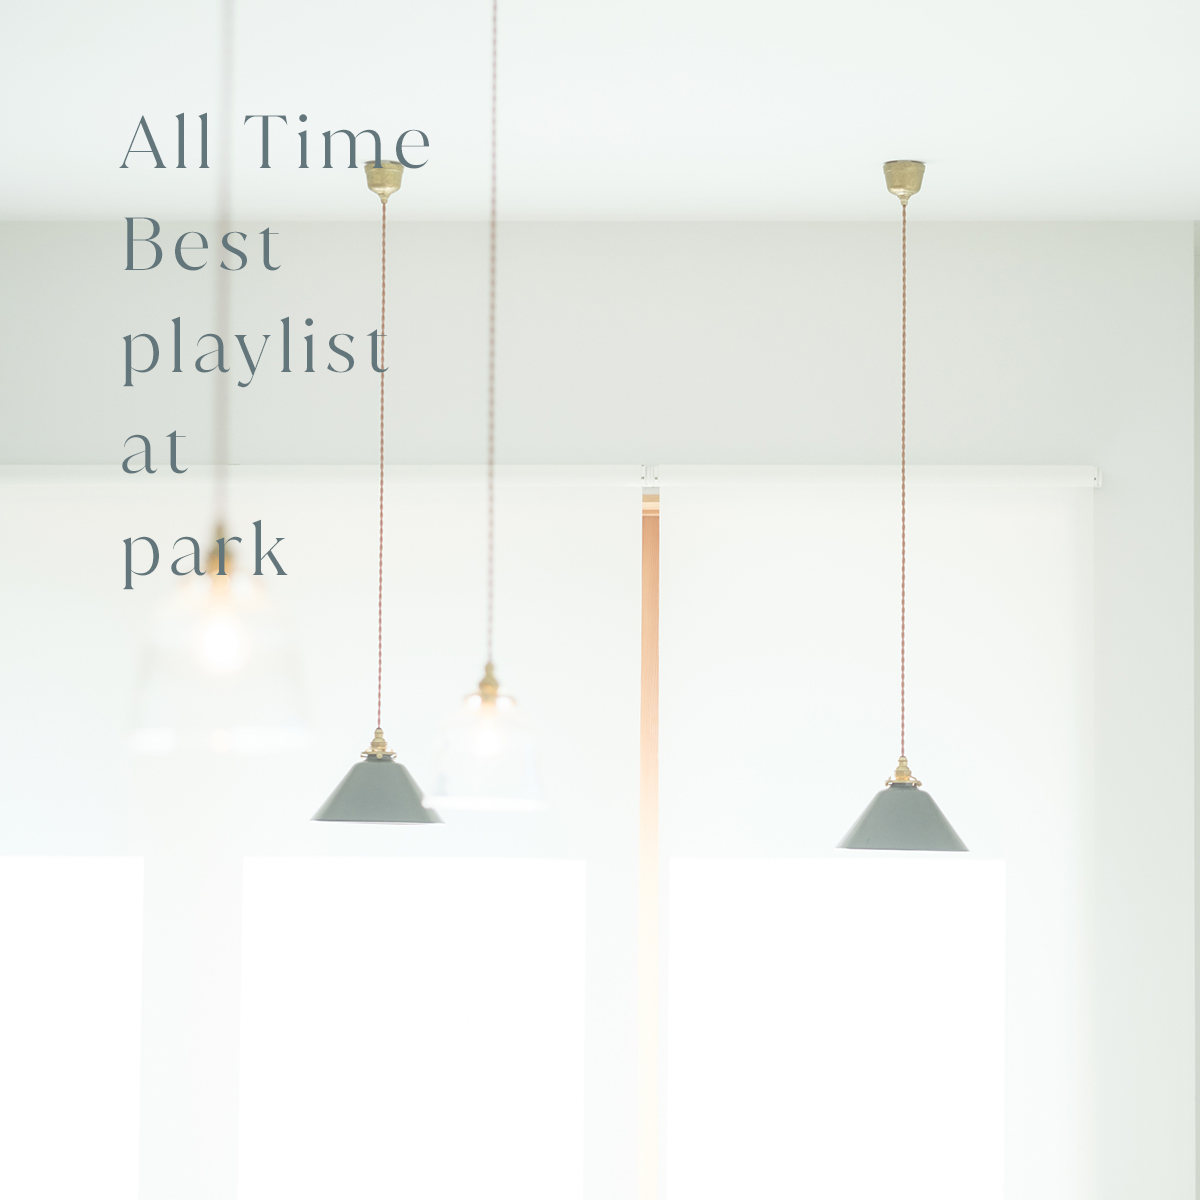 All Time Best Playlist at park 2021